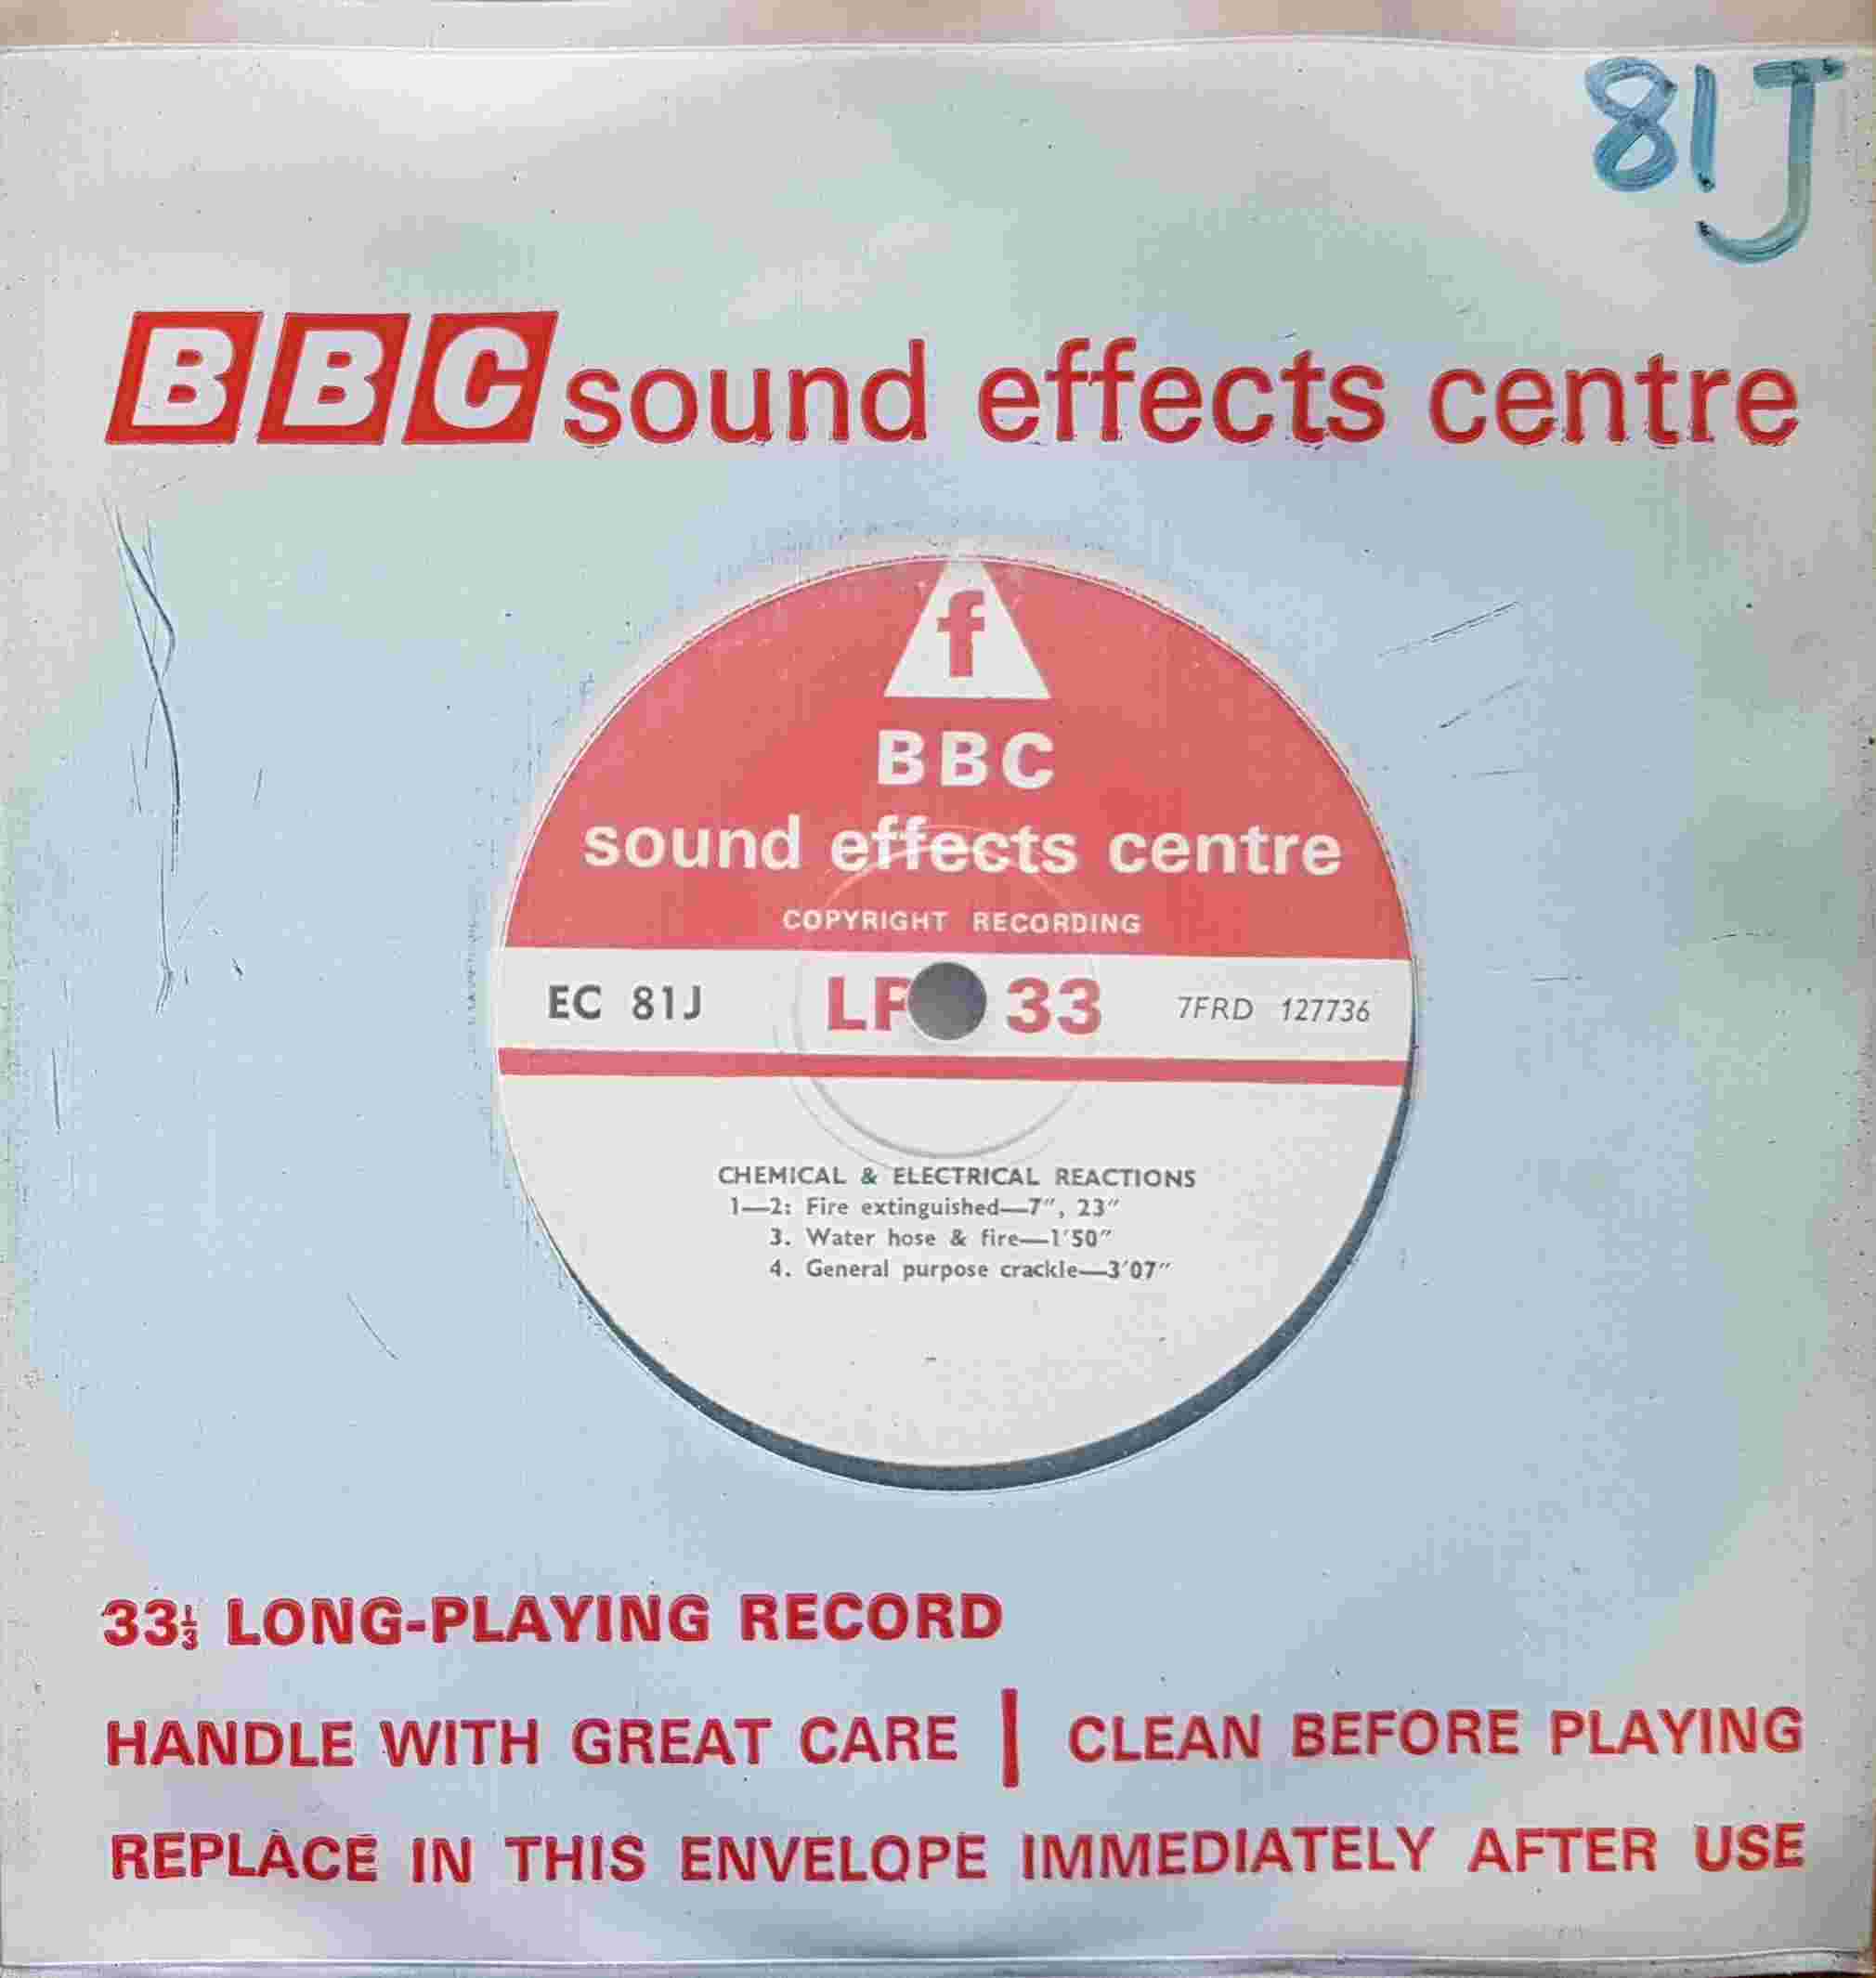 Picture of EC 81J Chemical & electrical reaction by artist Not registered from the BBC singles - Records and Tapes library